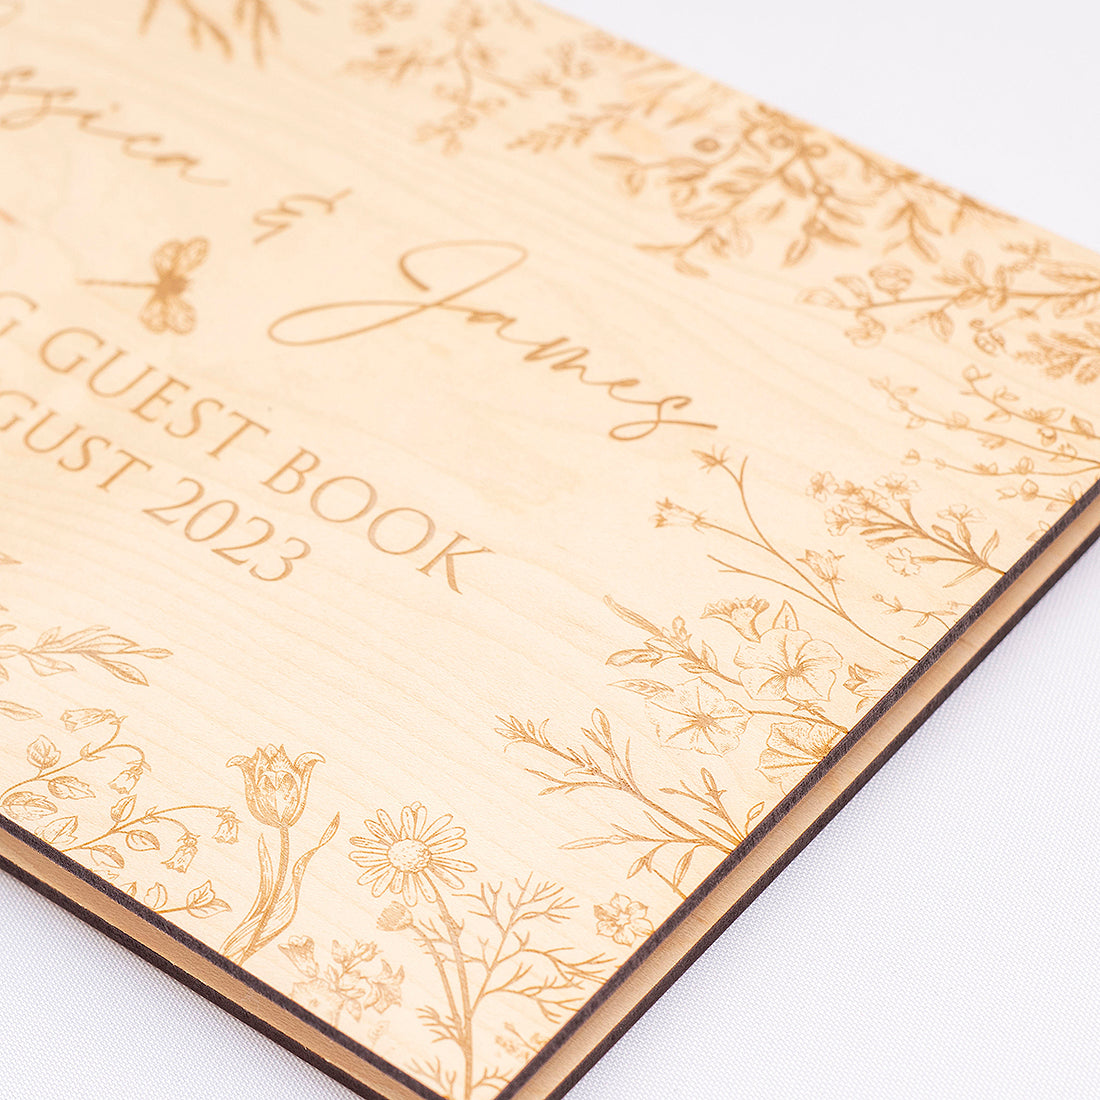 Botanical Wooden Engraved Rustic Wedding Guest Book-Weddings by Lumi